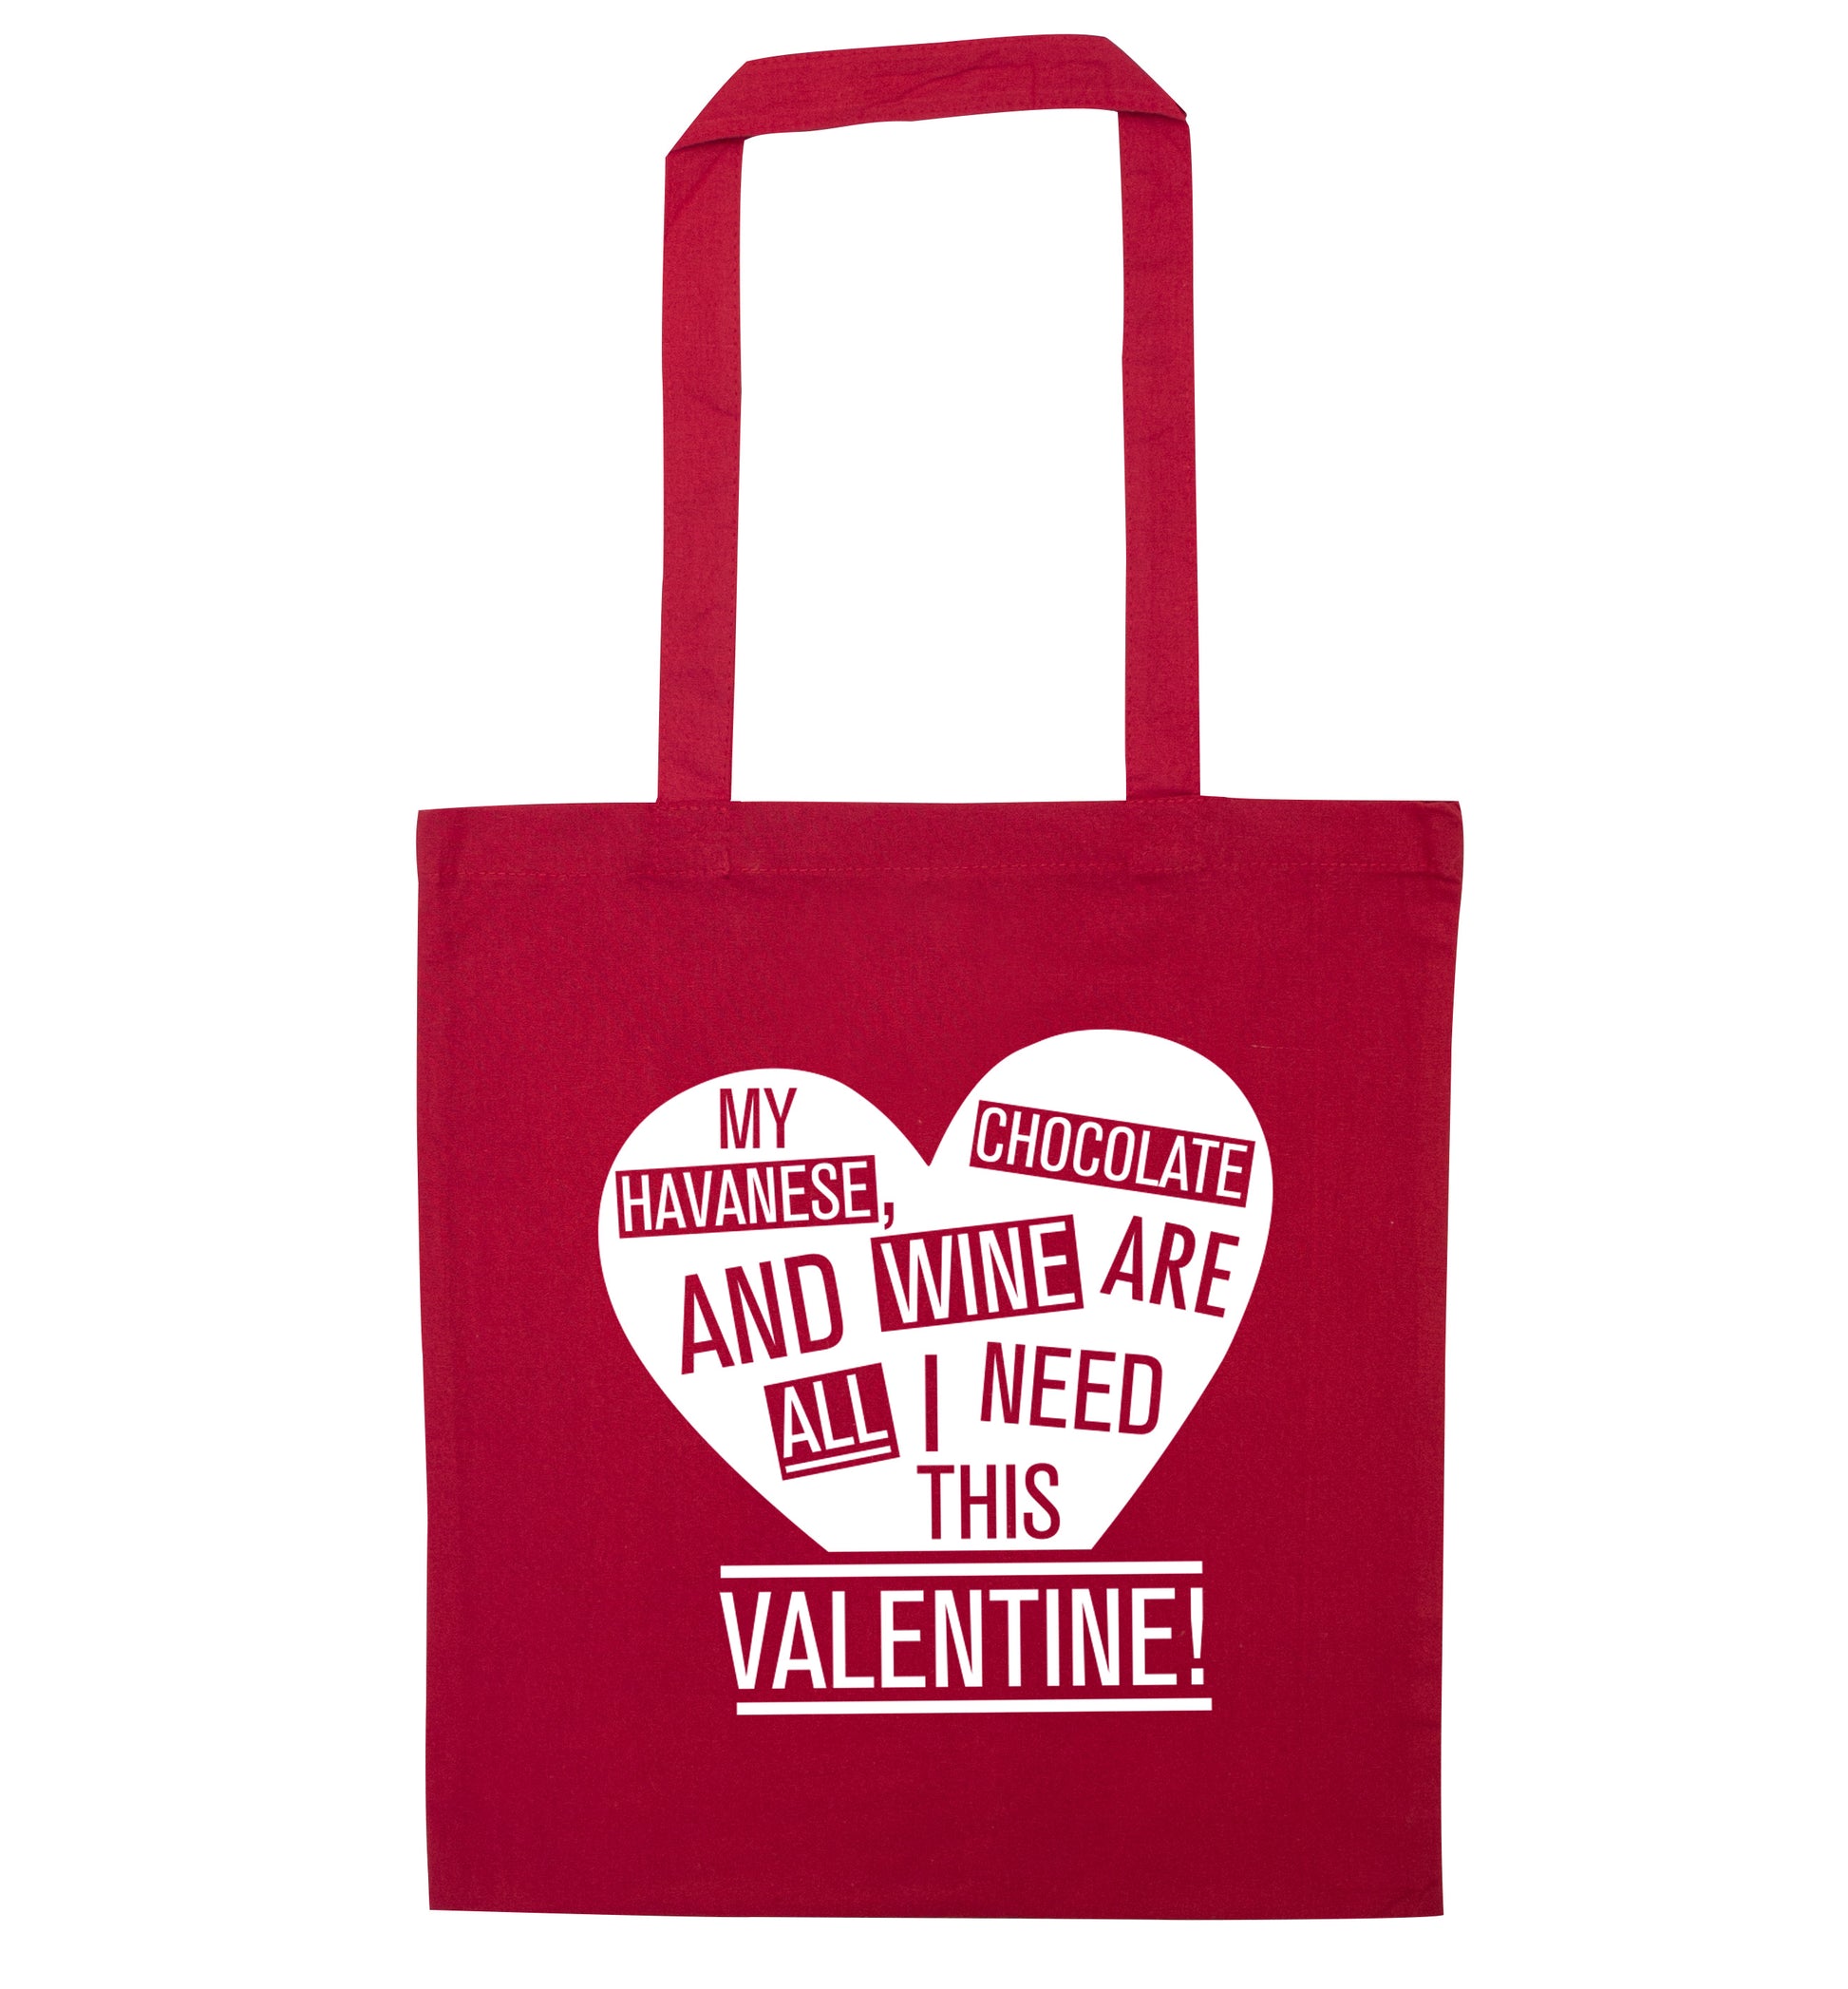 My havanese, chocolate and wine are all I need this valentine! red tote bag